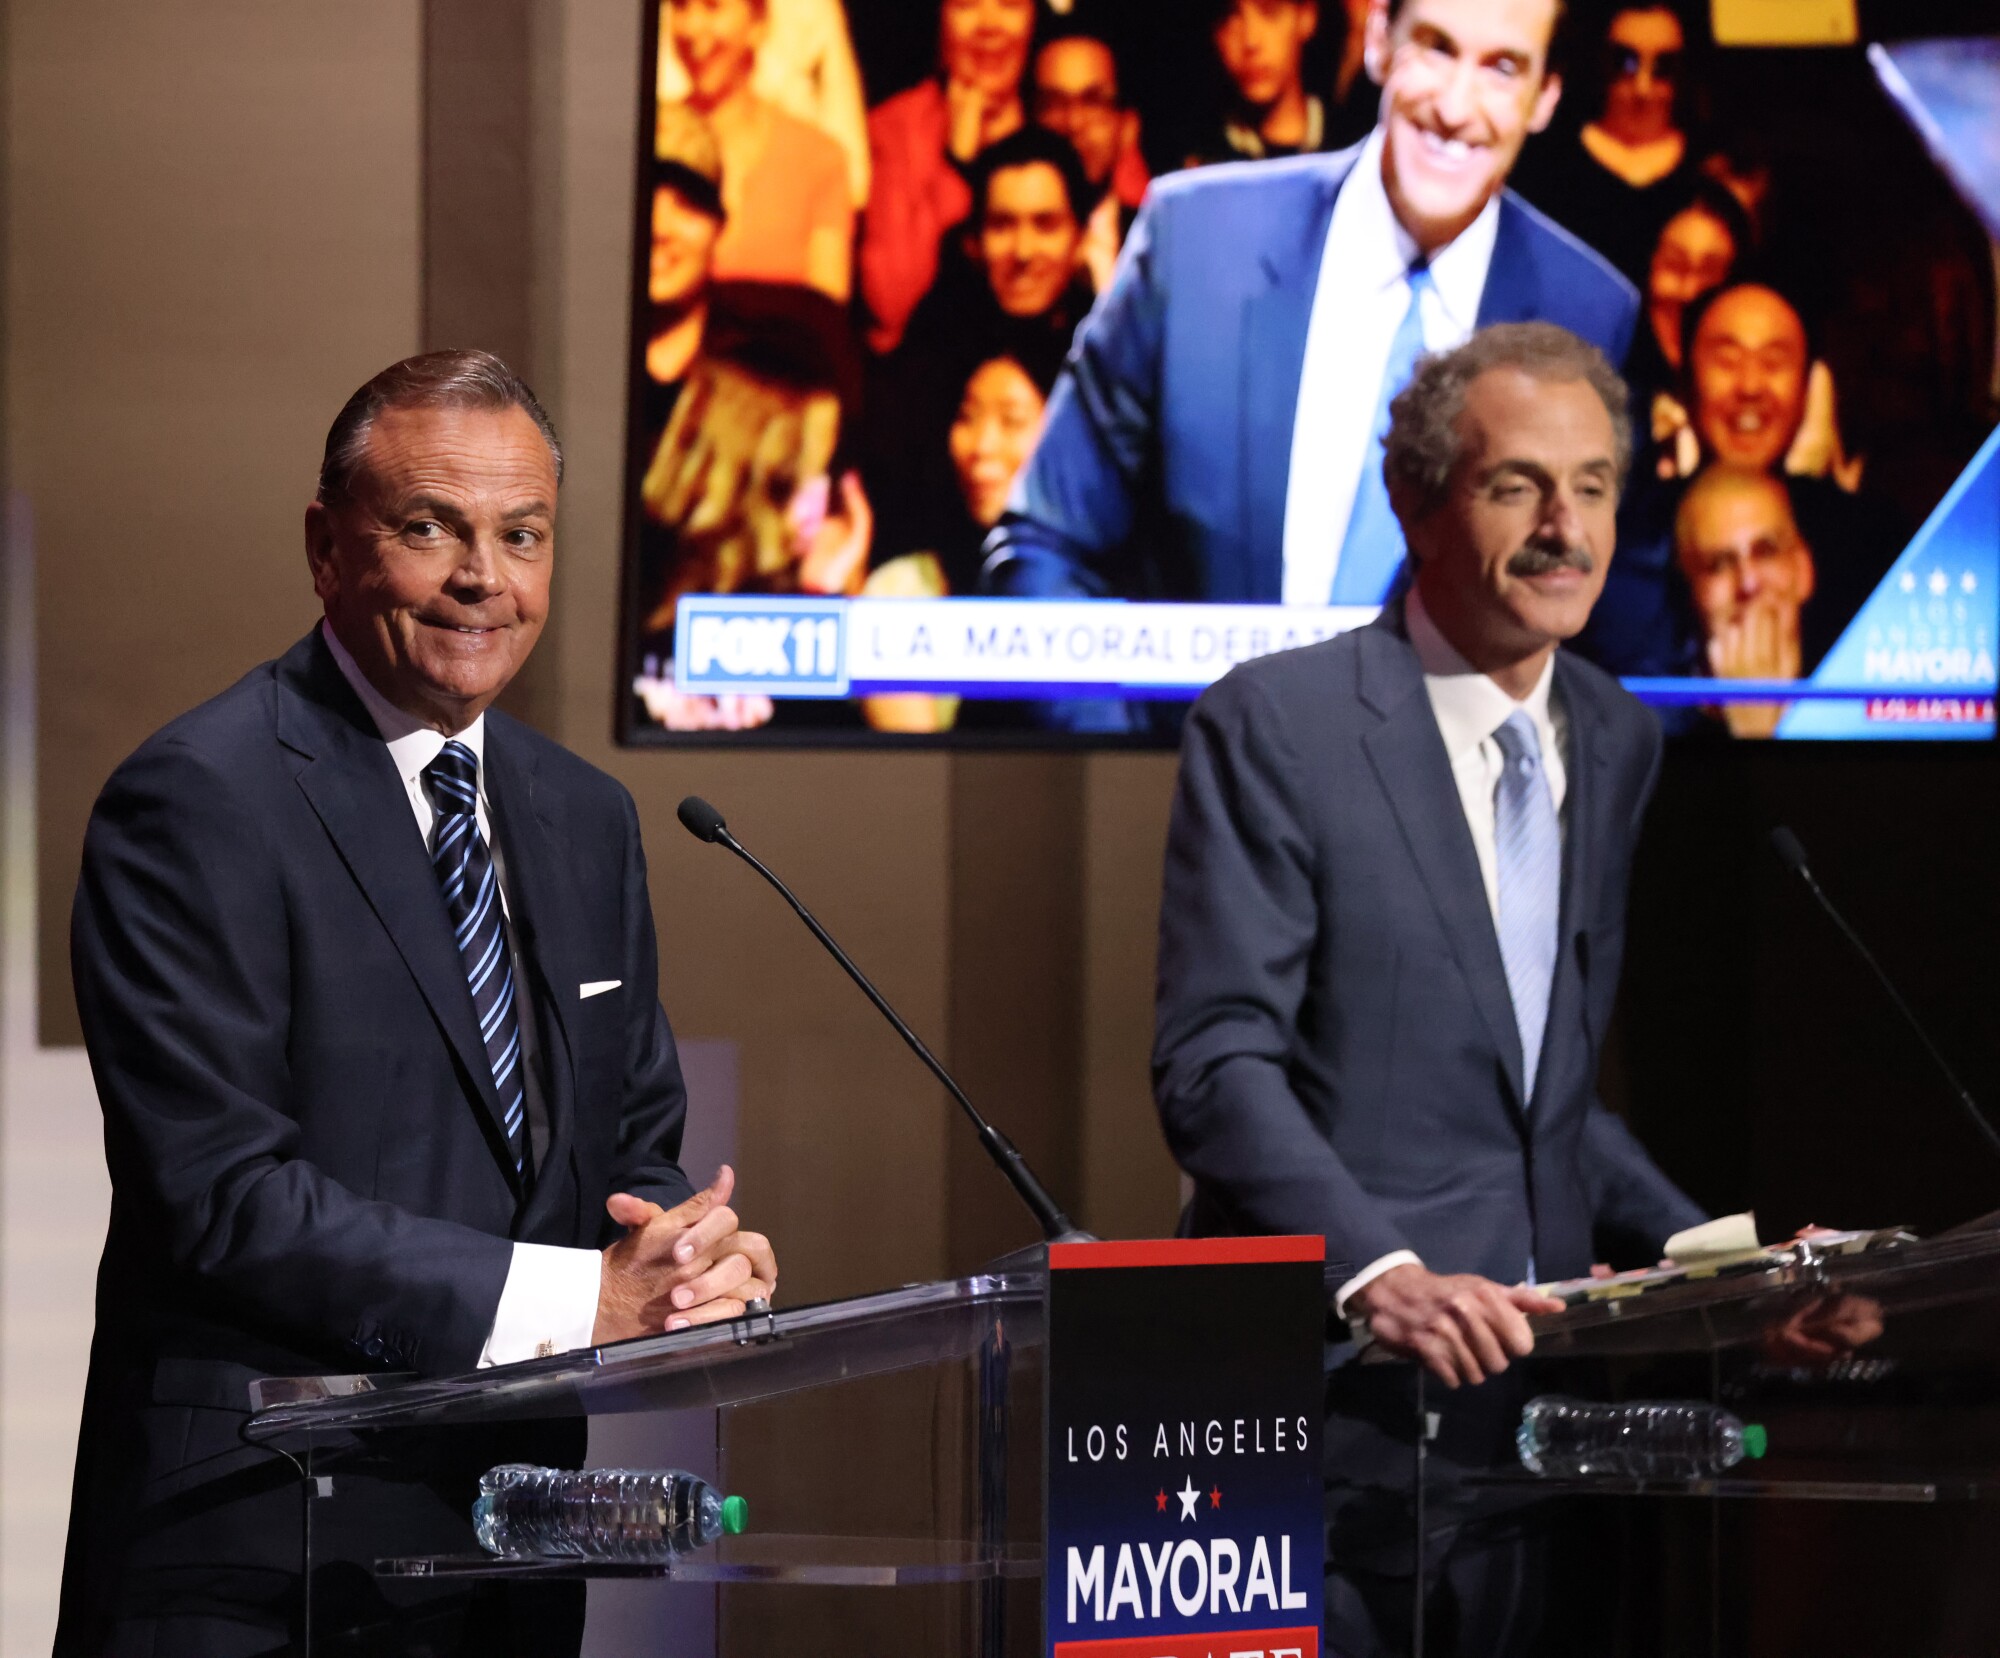 Los Angeles mayoral candidates Rick Caruso, businessman, left, and Mike Feuer, city attorney, listen during the debate 